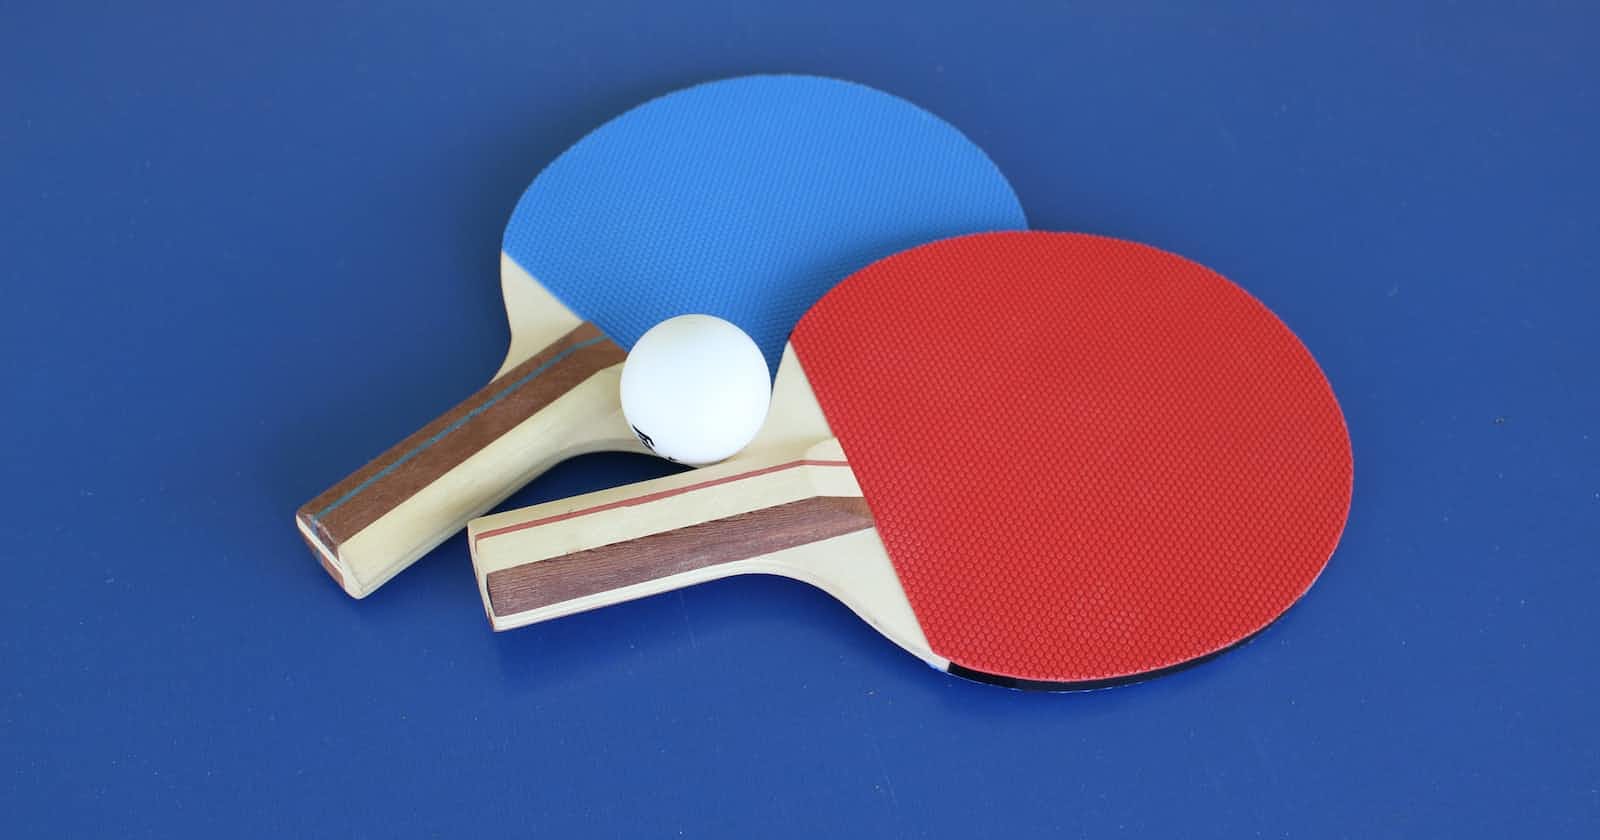 Part 8: Use Reinforcement Learning to simulate a game of Table Tennis with Graphics in Python 
Source Code